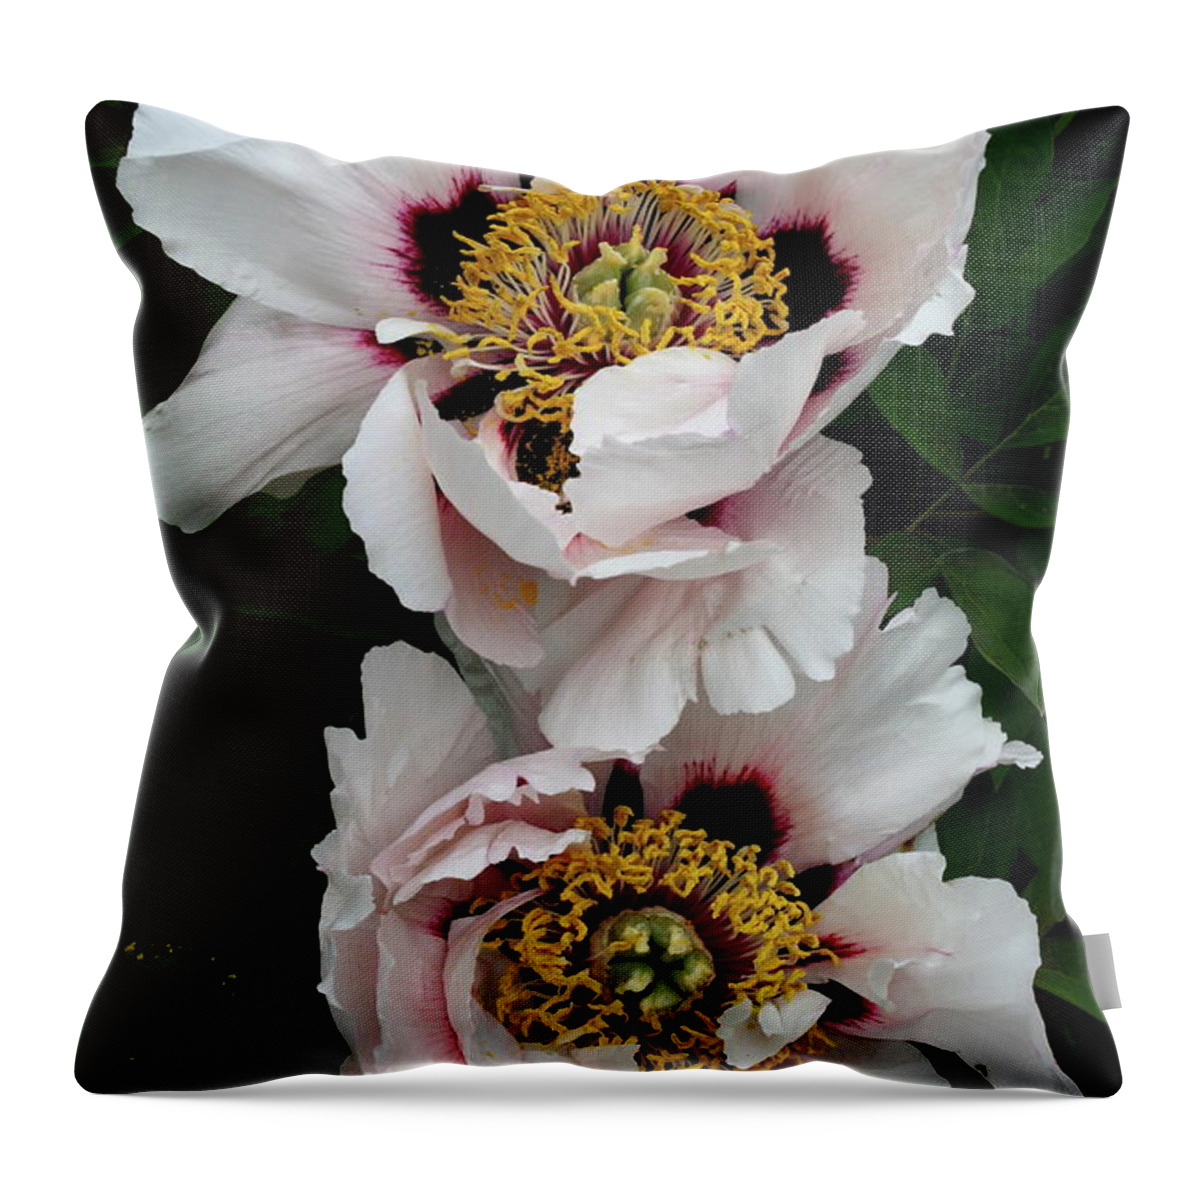 White Peony Throw Pillow featuring the photograph Two Together by Christiane Schulze Art And Photography